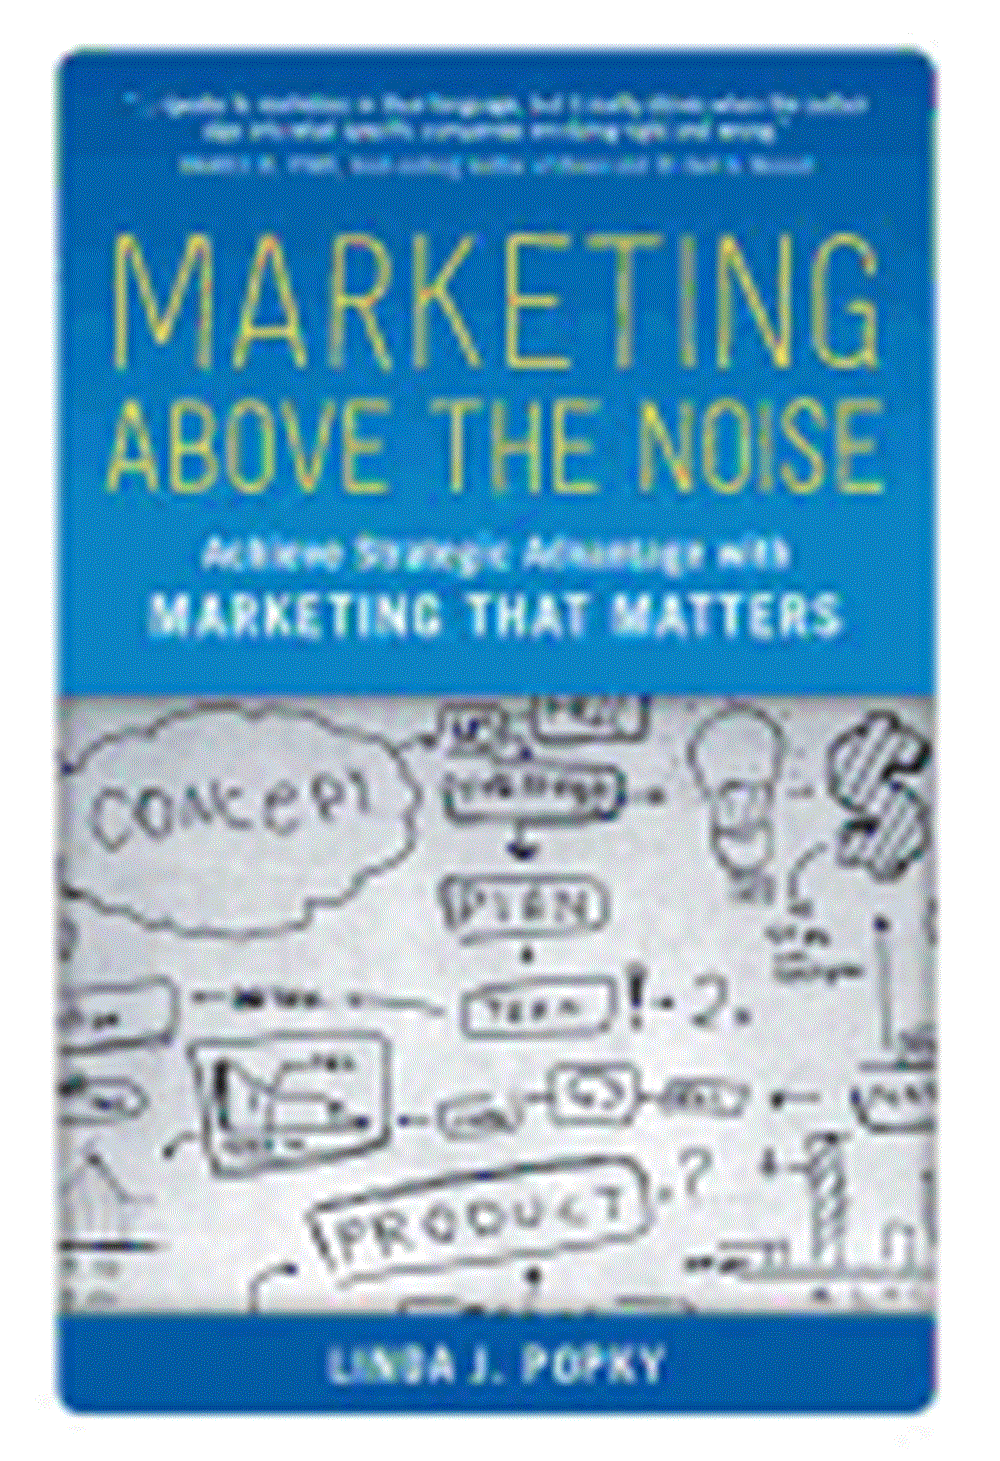 Marketing Above the Noise Achieve Strategic Advantage with Marketing That Matters